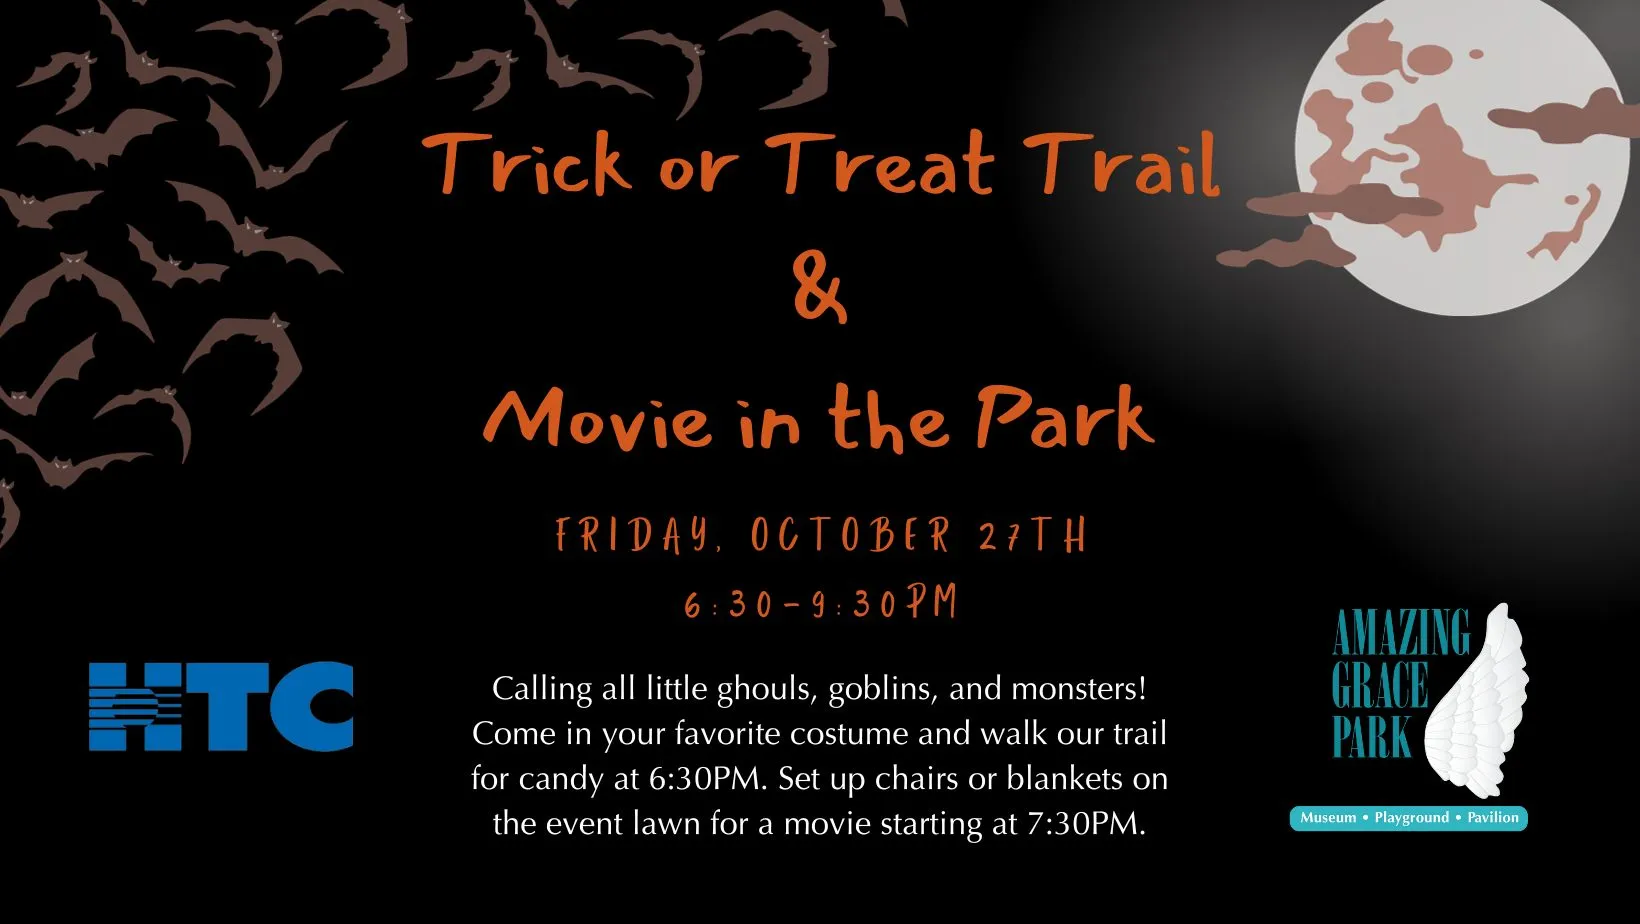 Trick or Treat Trail & Movie in the Park